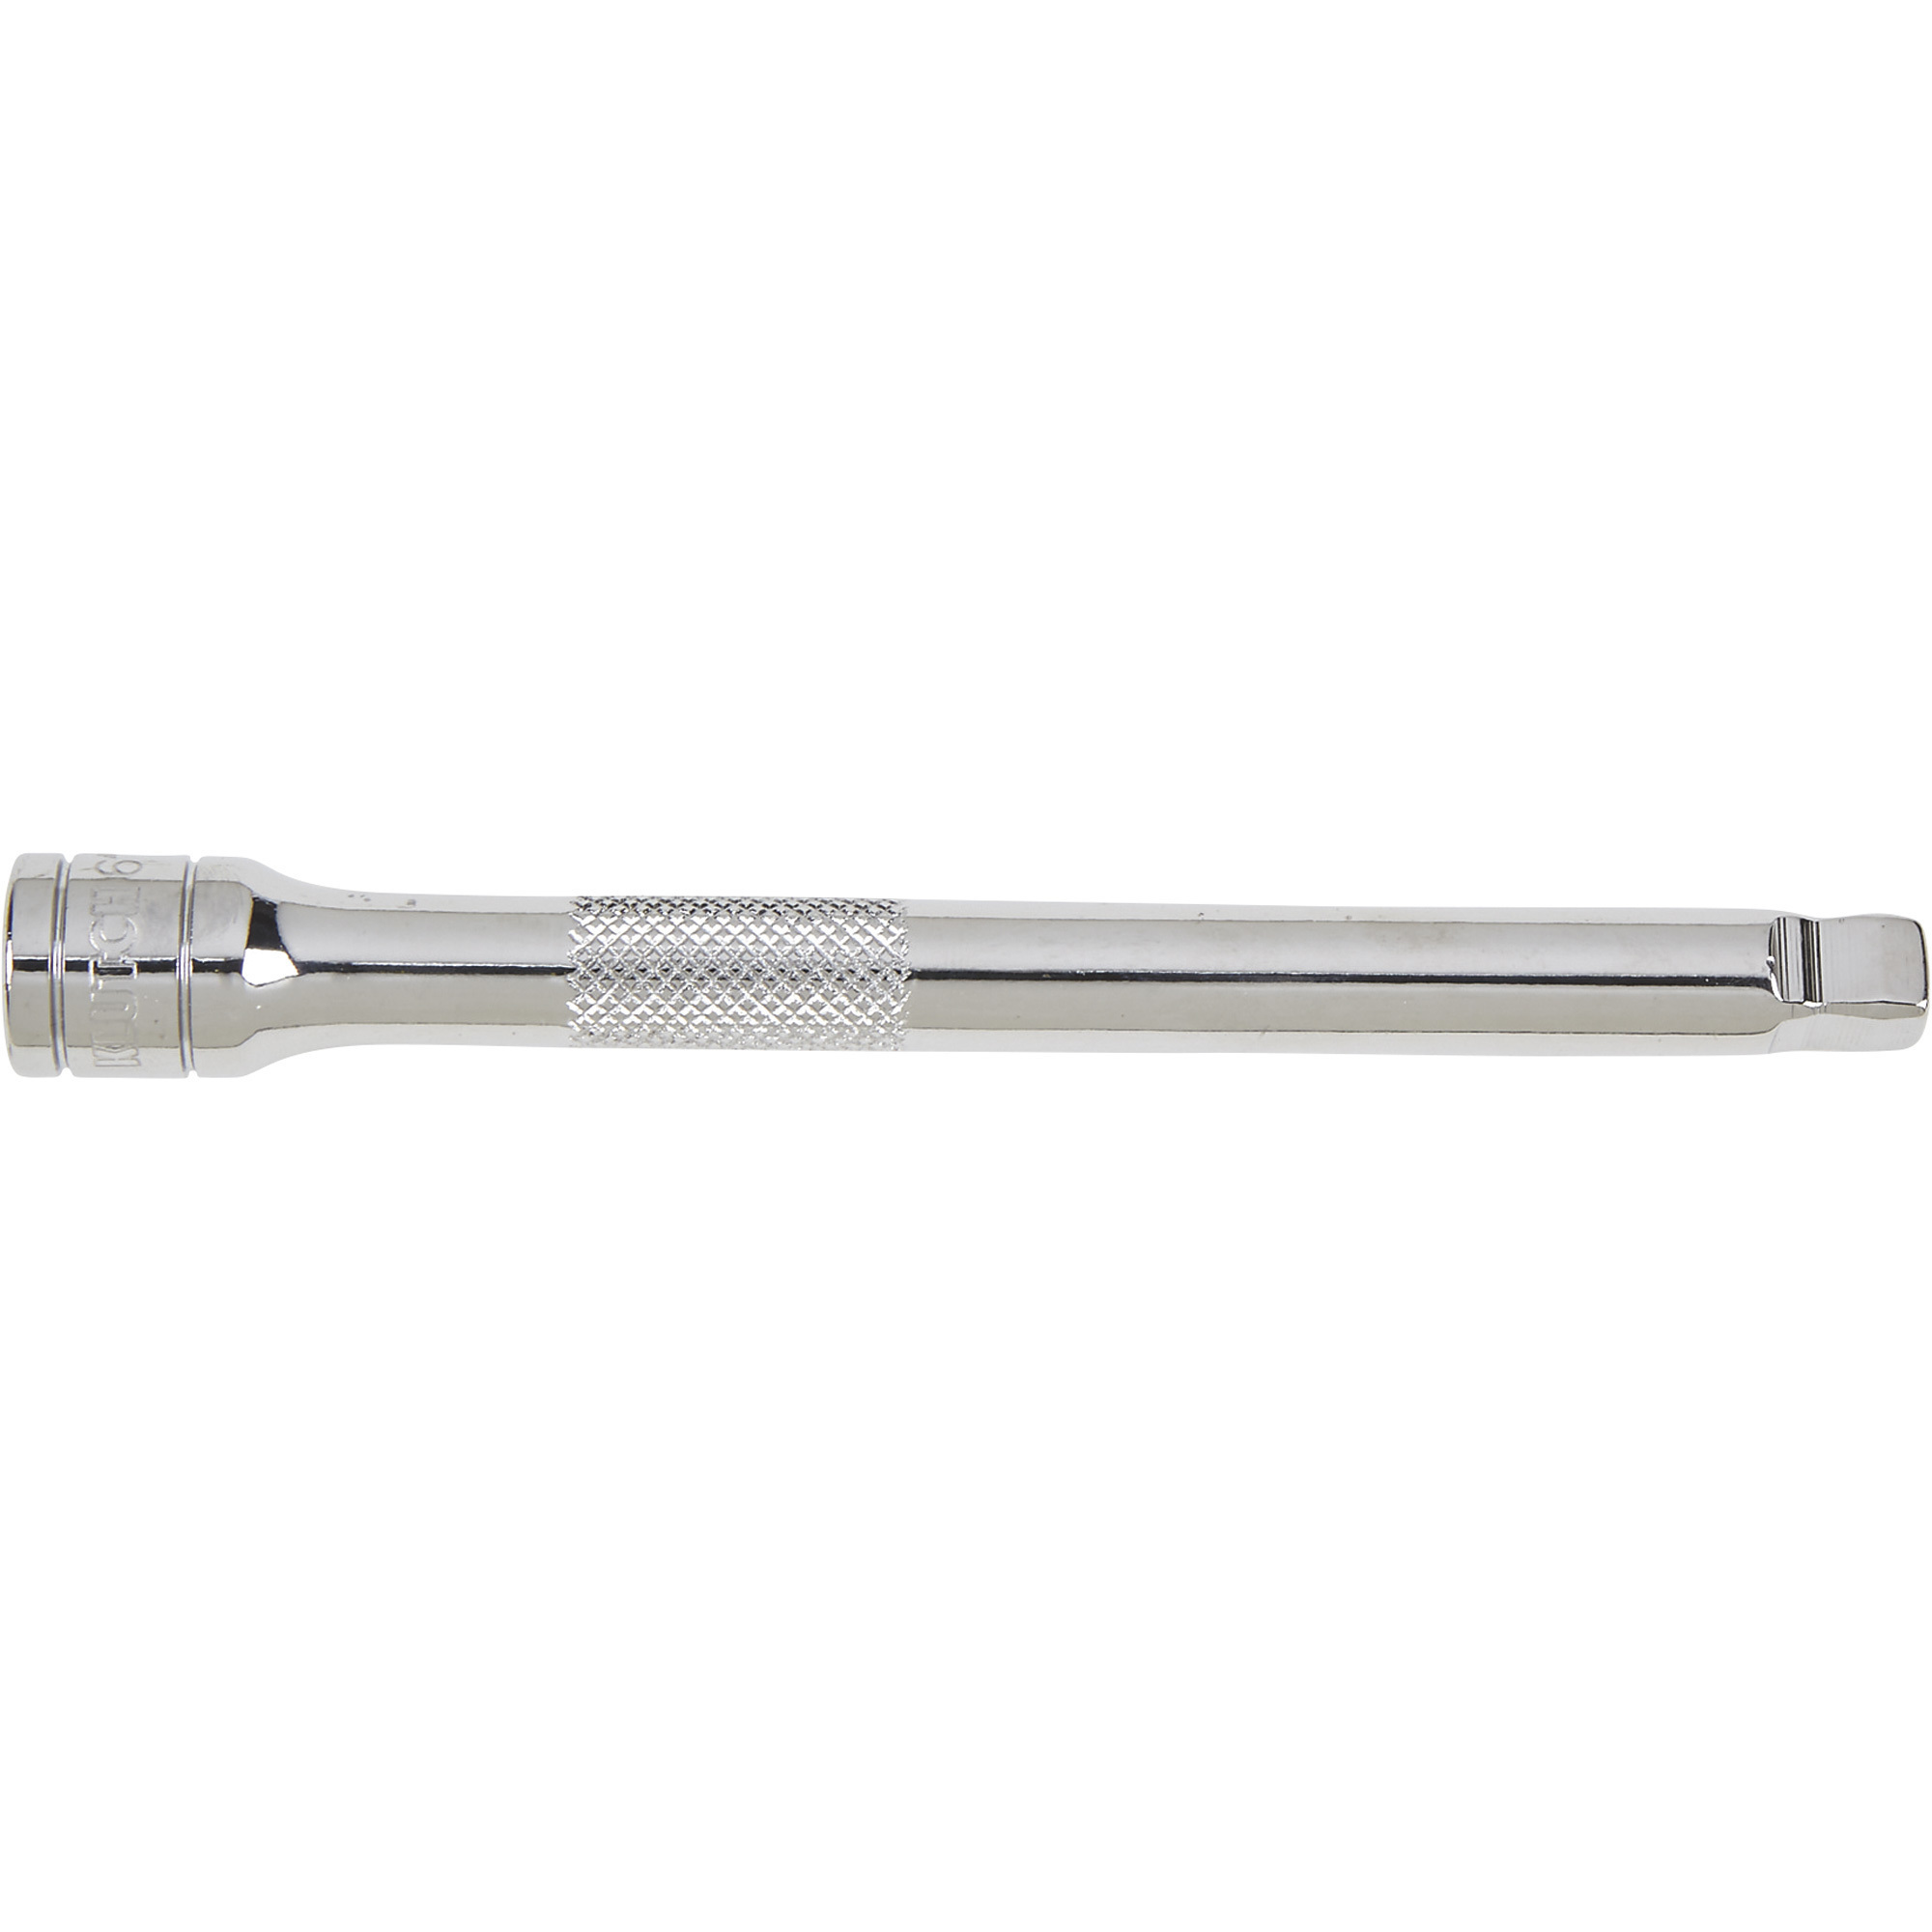 Klutch 3/8Inch Drive Extension, 6Inch, Dual Position